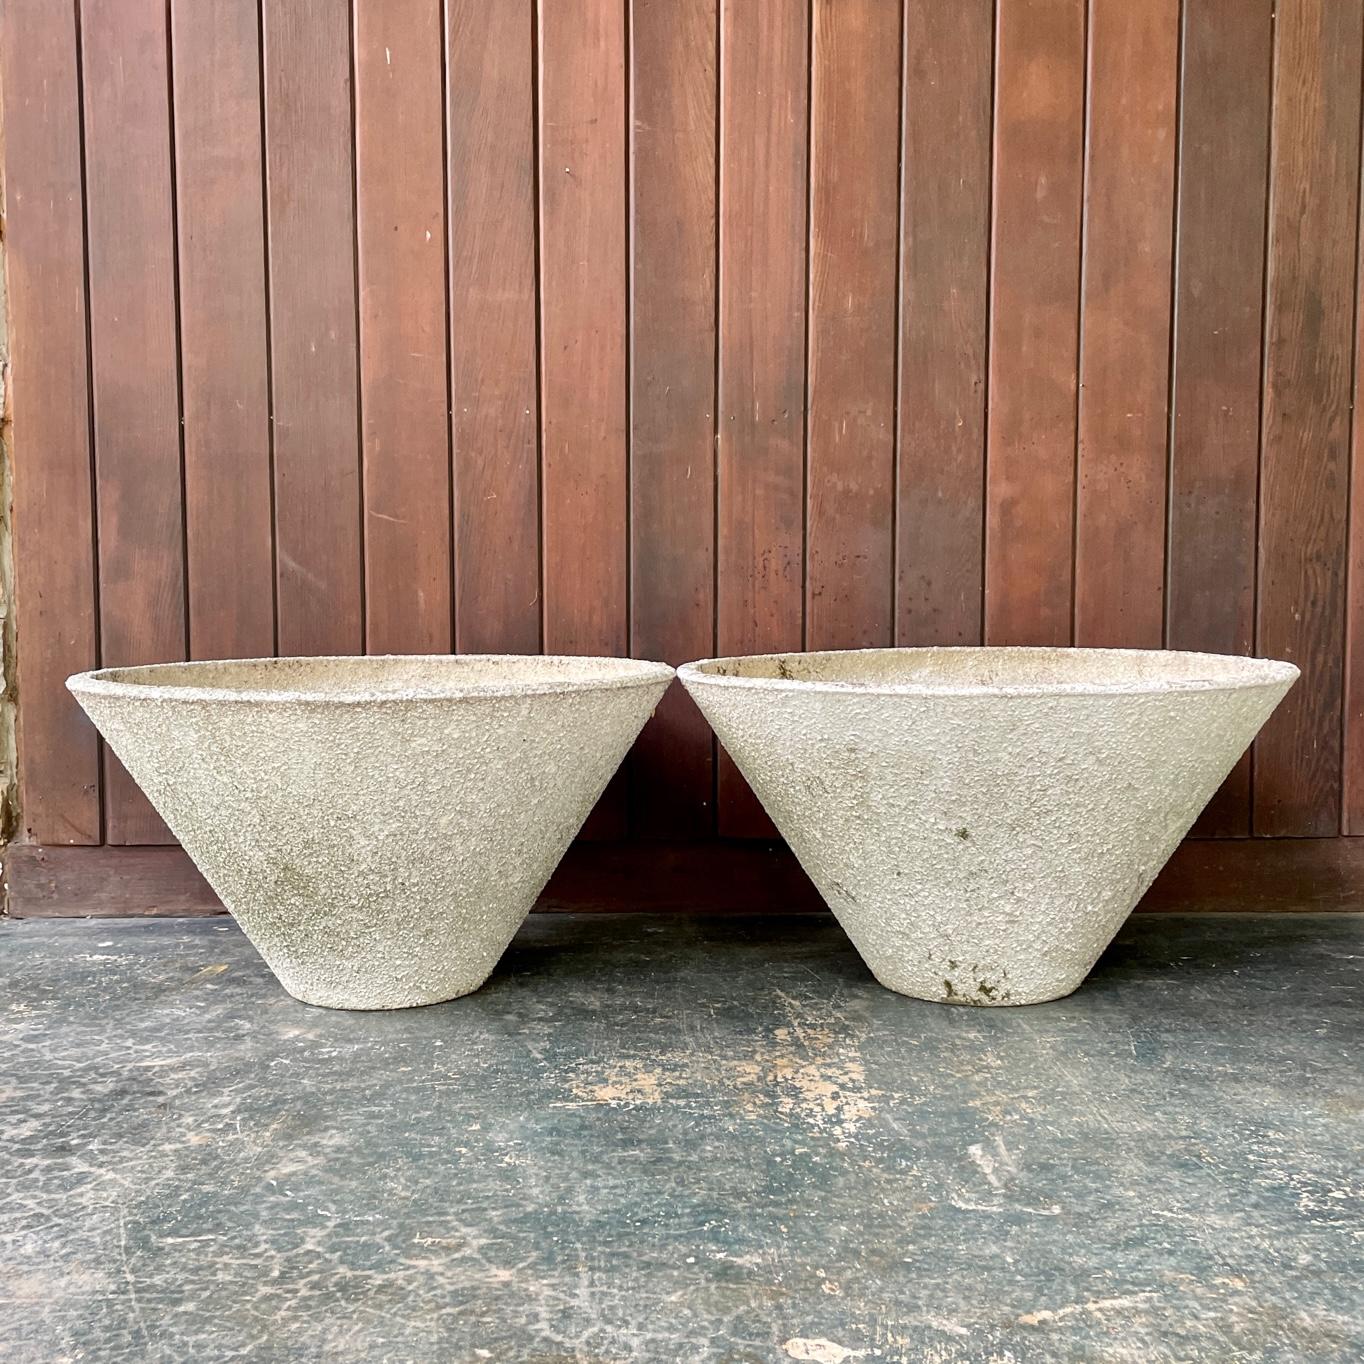 1960s Massive Coned Planters Pair by Willy Guhl for Eternit, California Style In Fair Condition For Sale In Hyattsville, MD